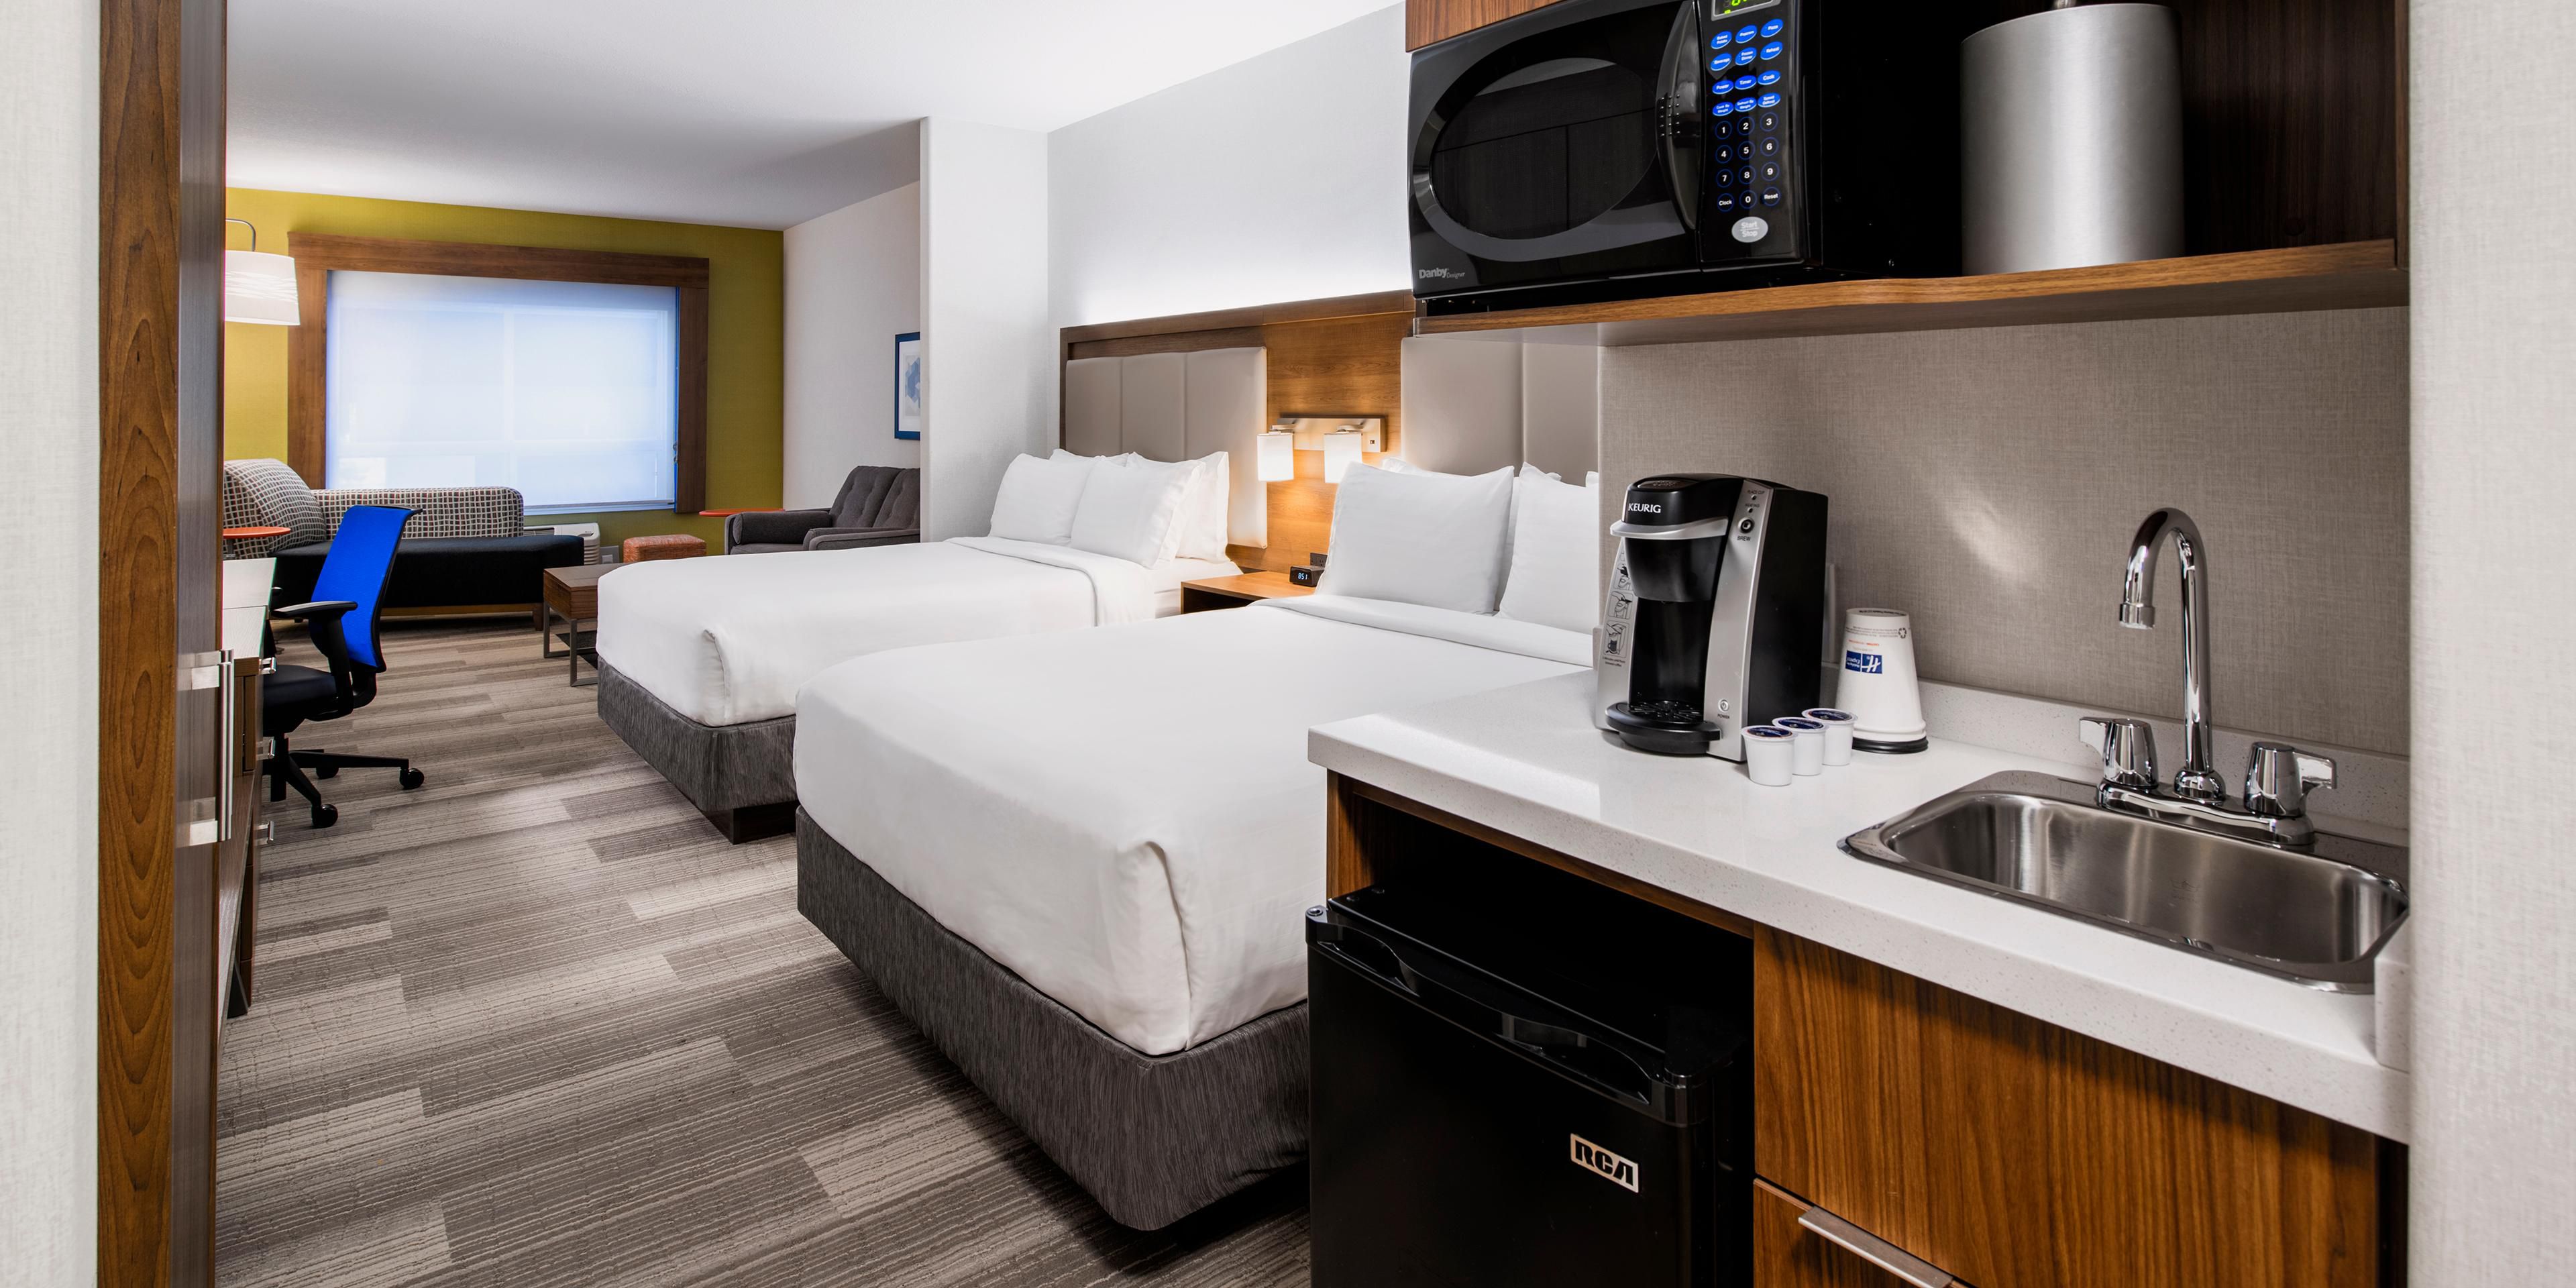 Our rooms feature a microwave, minifridge and coffee maker to make your longer stay more comfortable. We are also less than 3km away from the Real Canadian Superstore for all of your shopping needs.